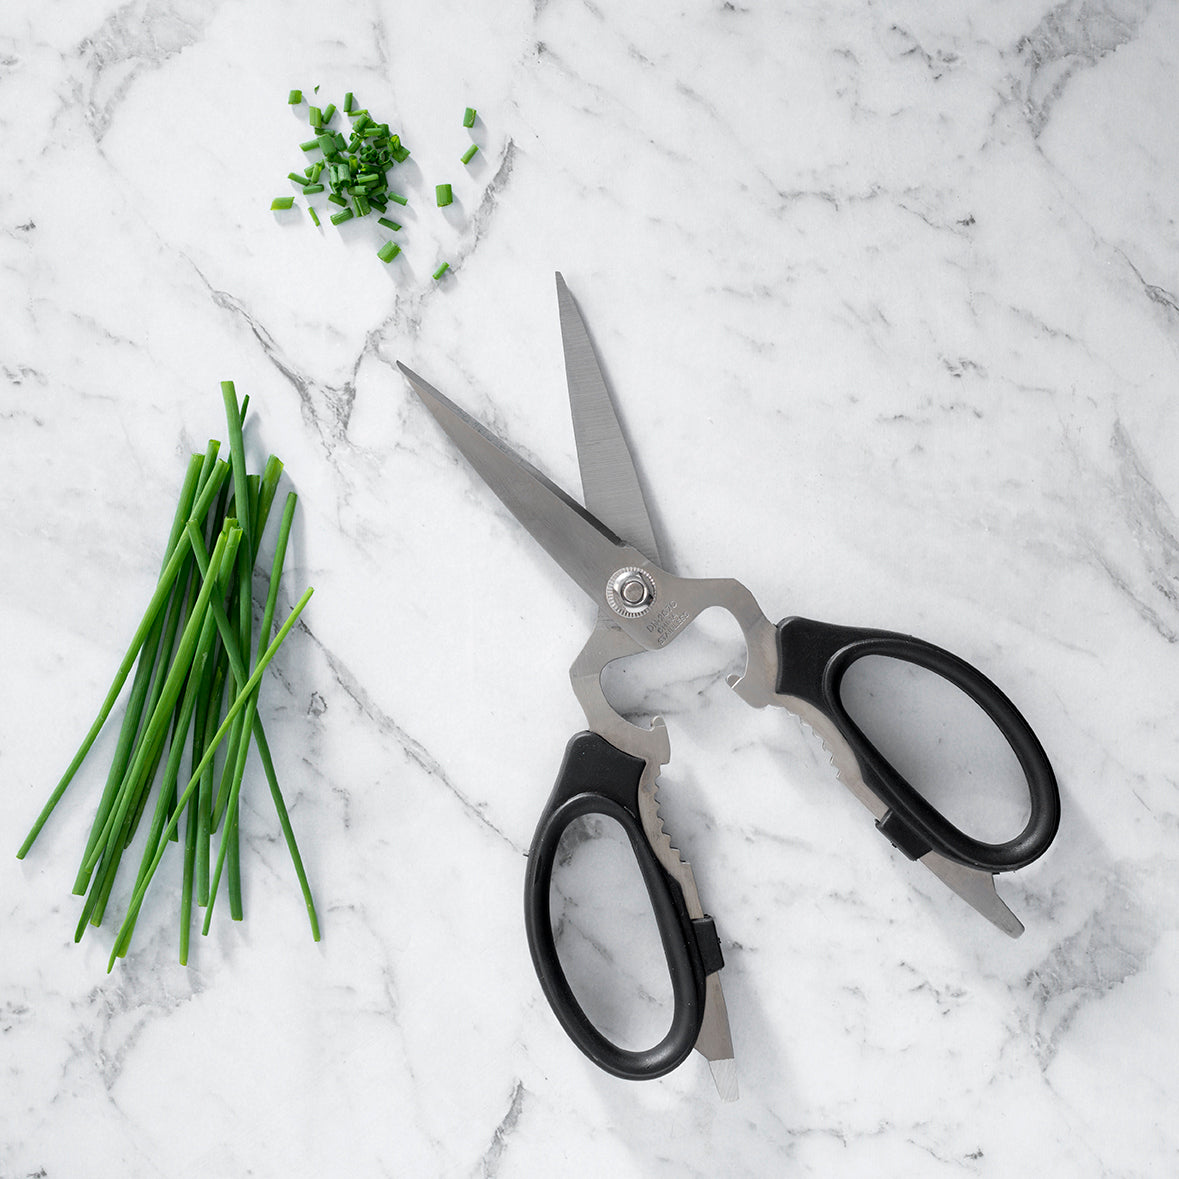 The Best Kitchen Shears